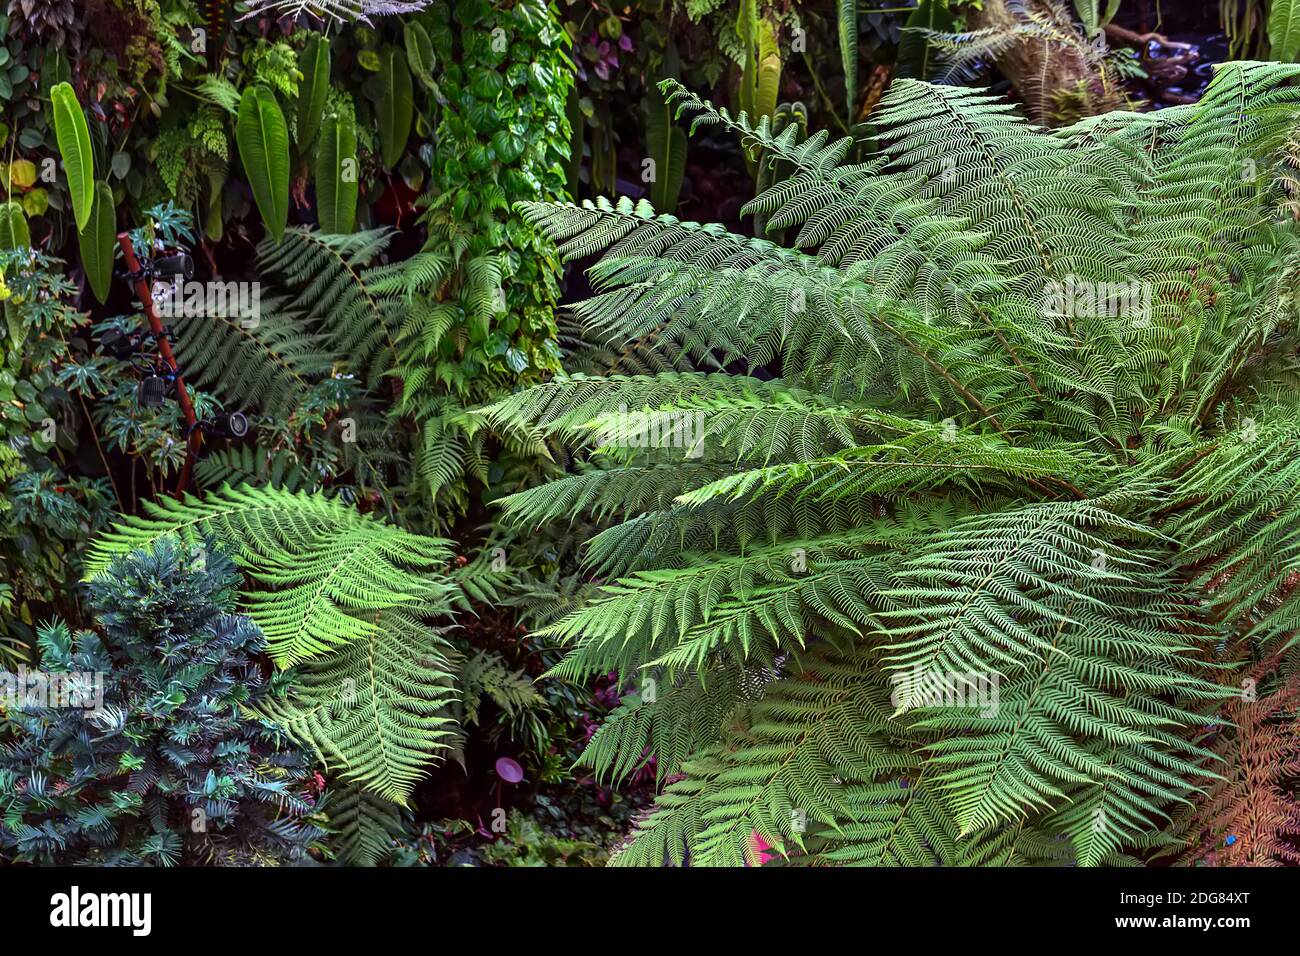 Green fern and other plants Stock Photo